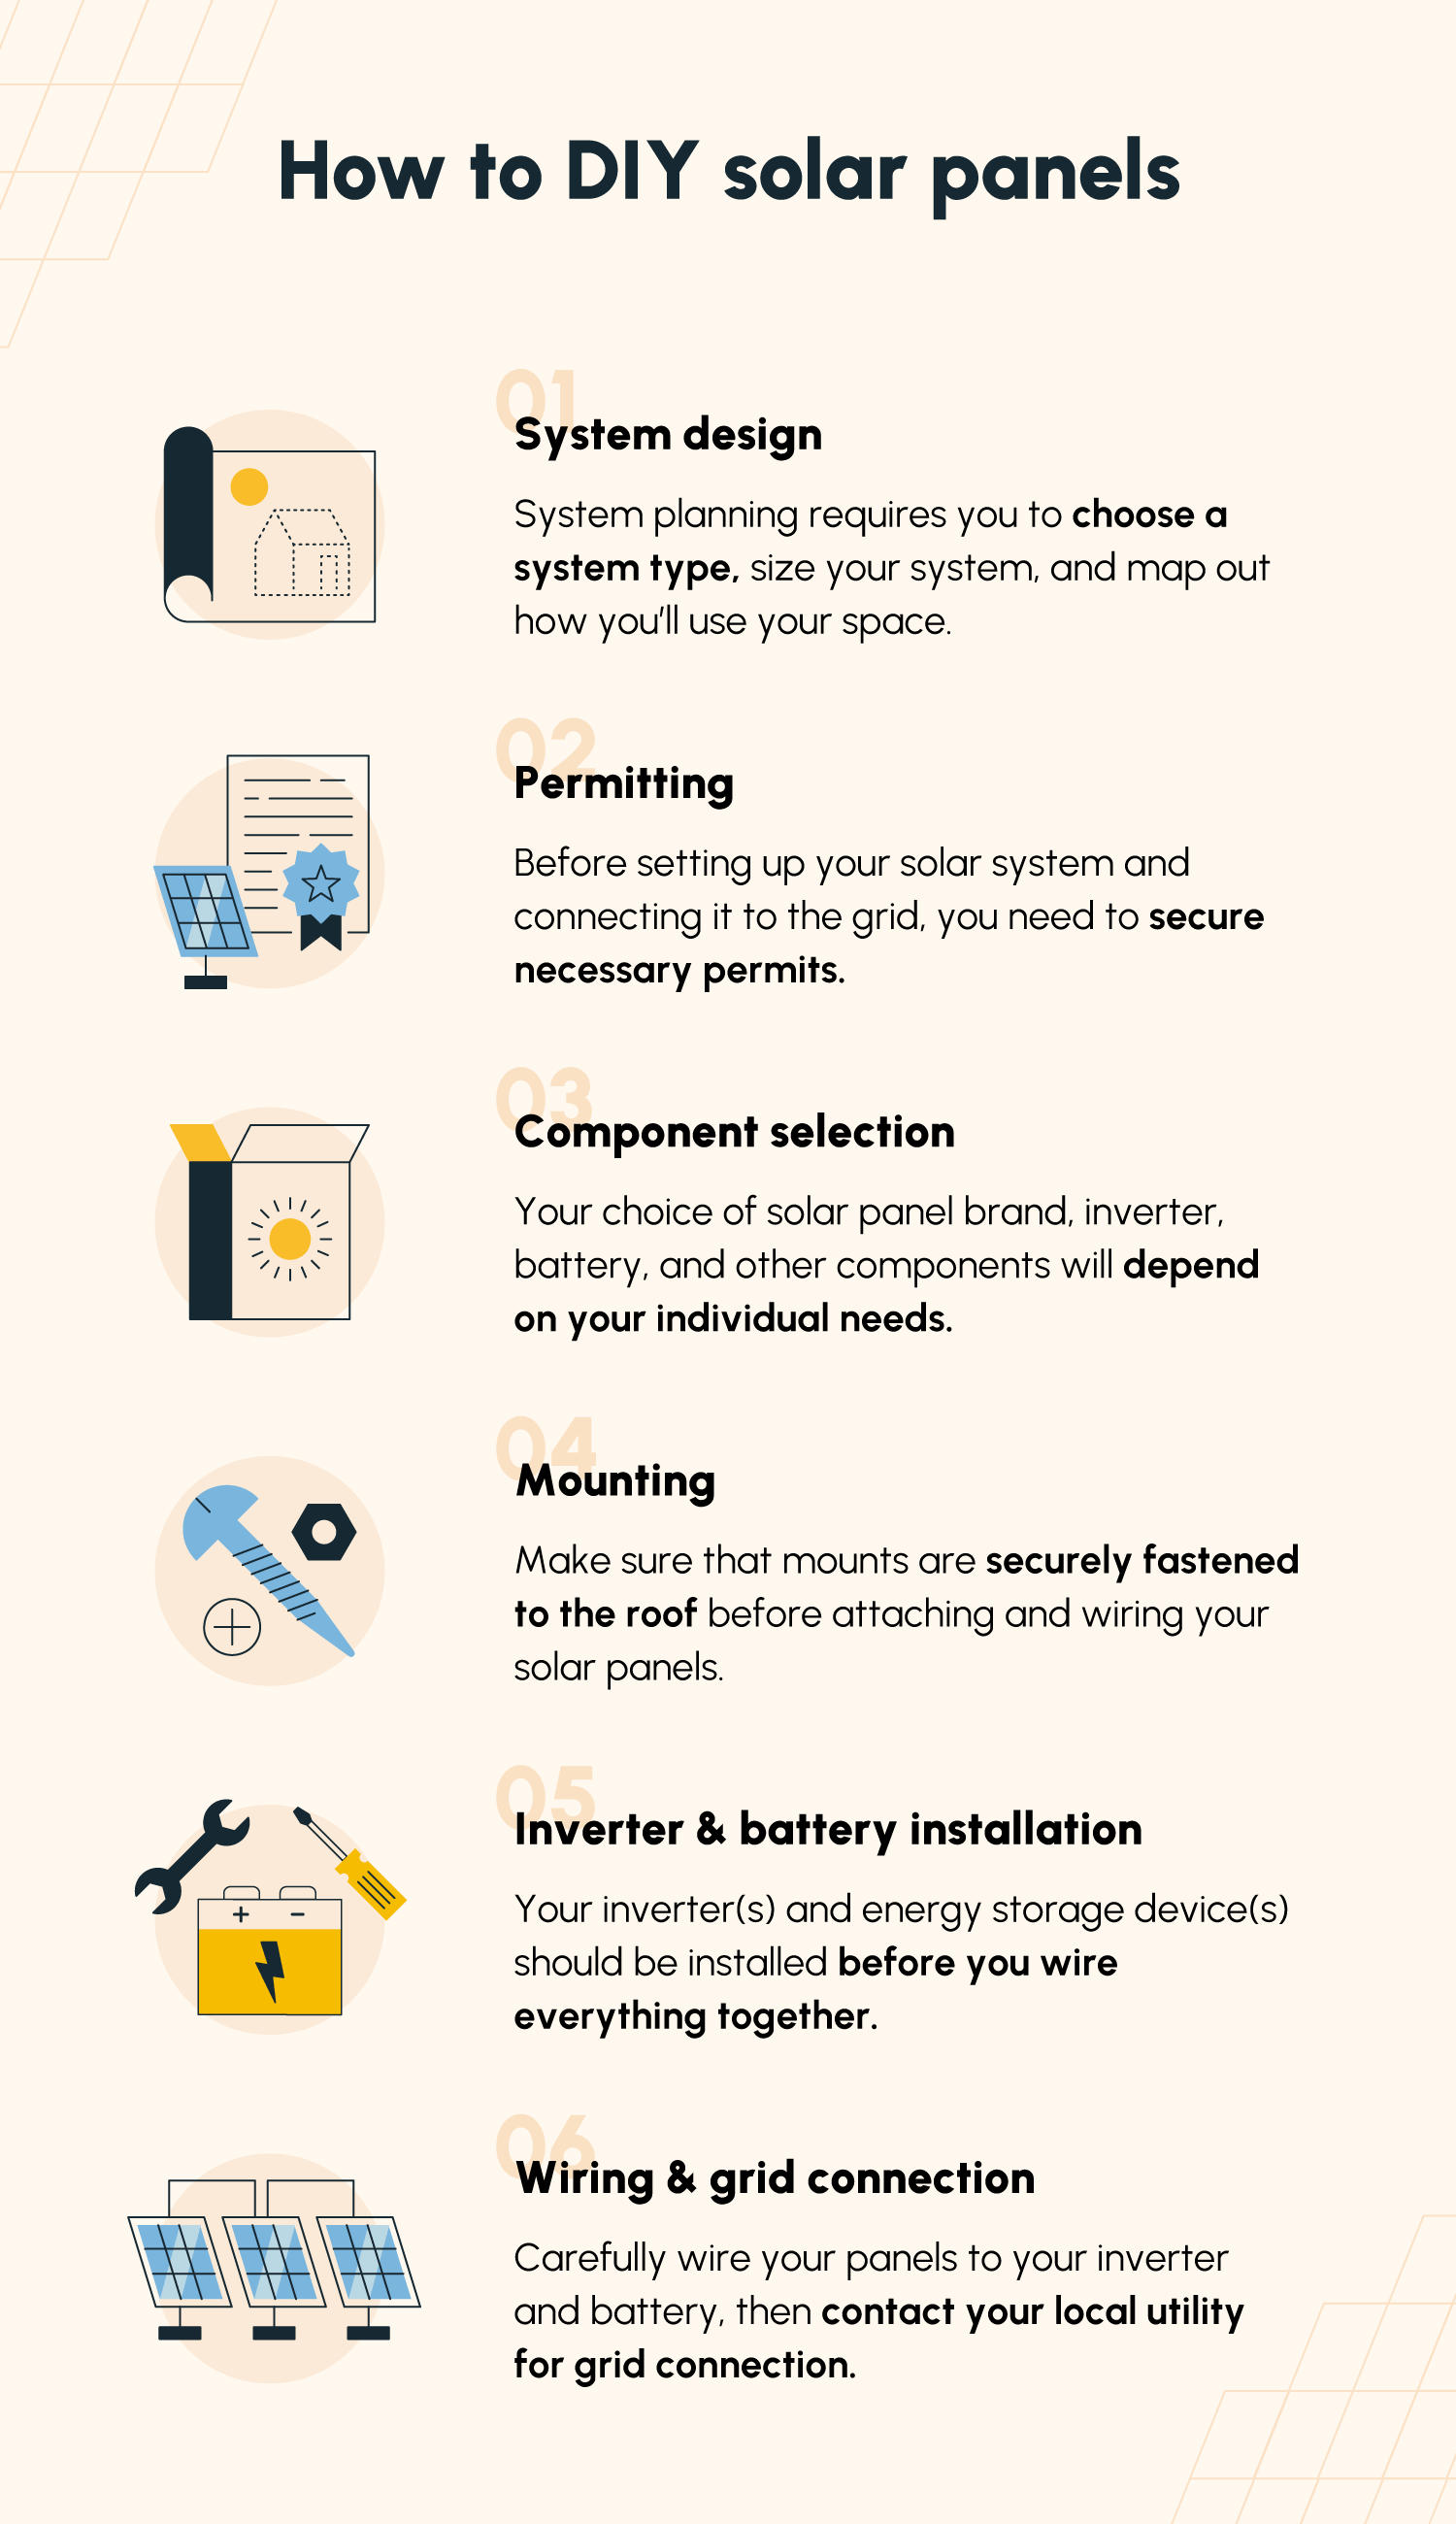 An illustrated list of the six major steps involved in a DIY solar panel installation